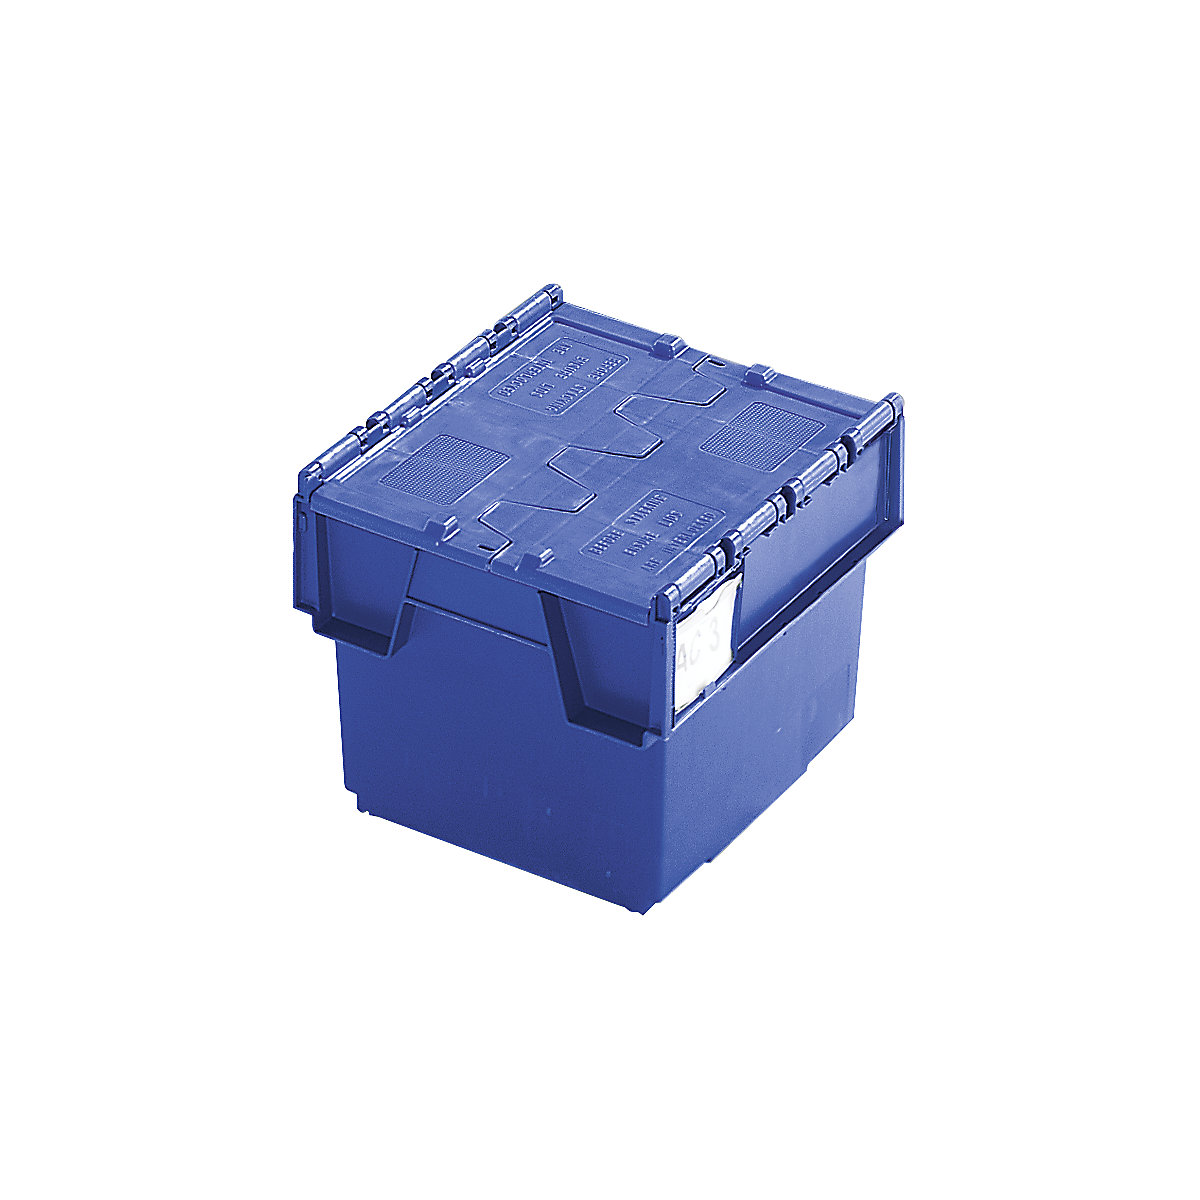 KAIMAN reusable stacking container, capacity 20 litres, LxWxH 400 x 300 x 252 mm, blue, 10+ items